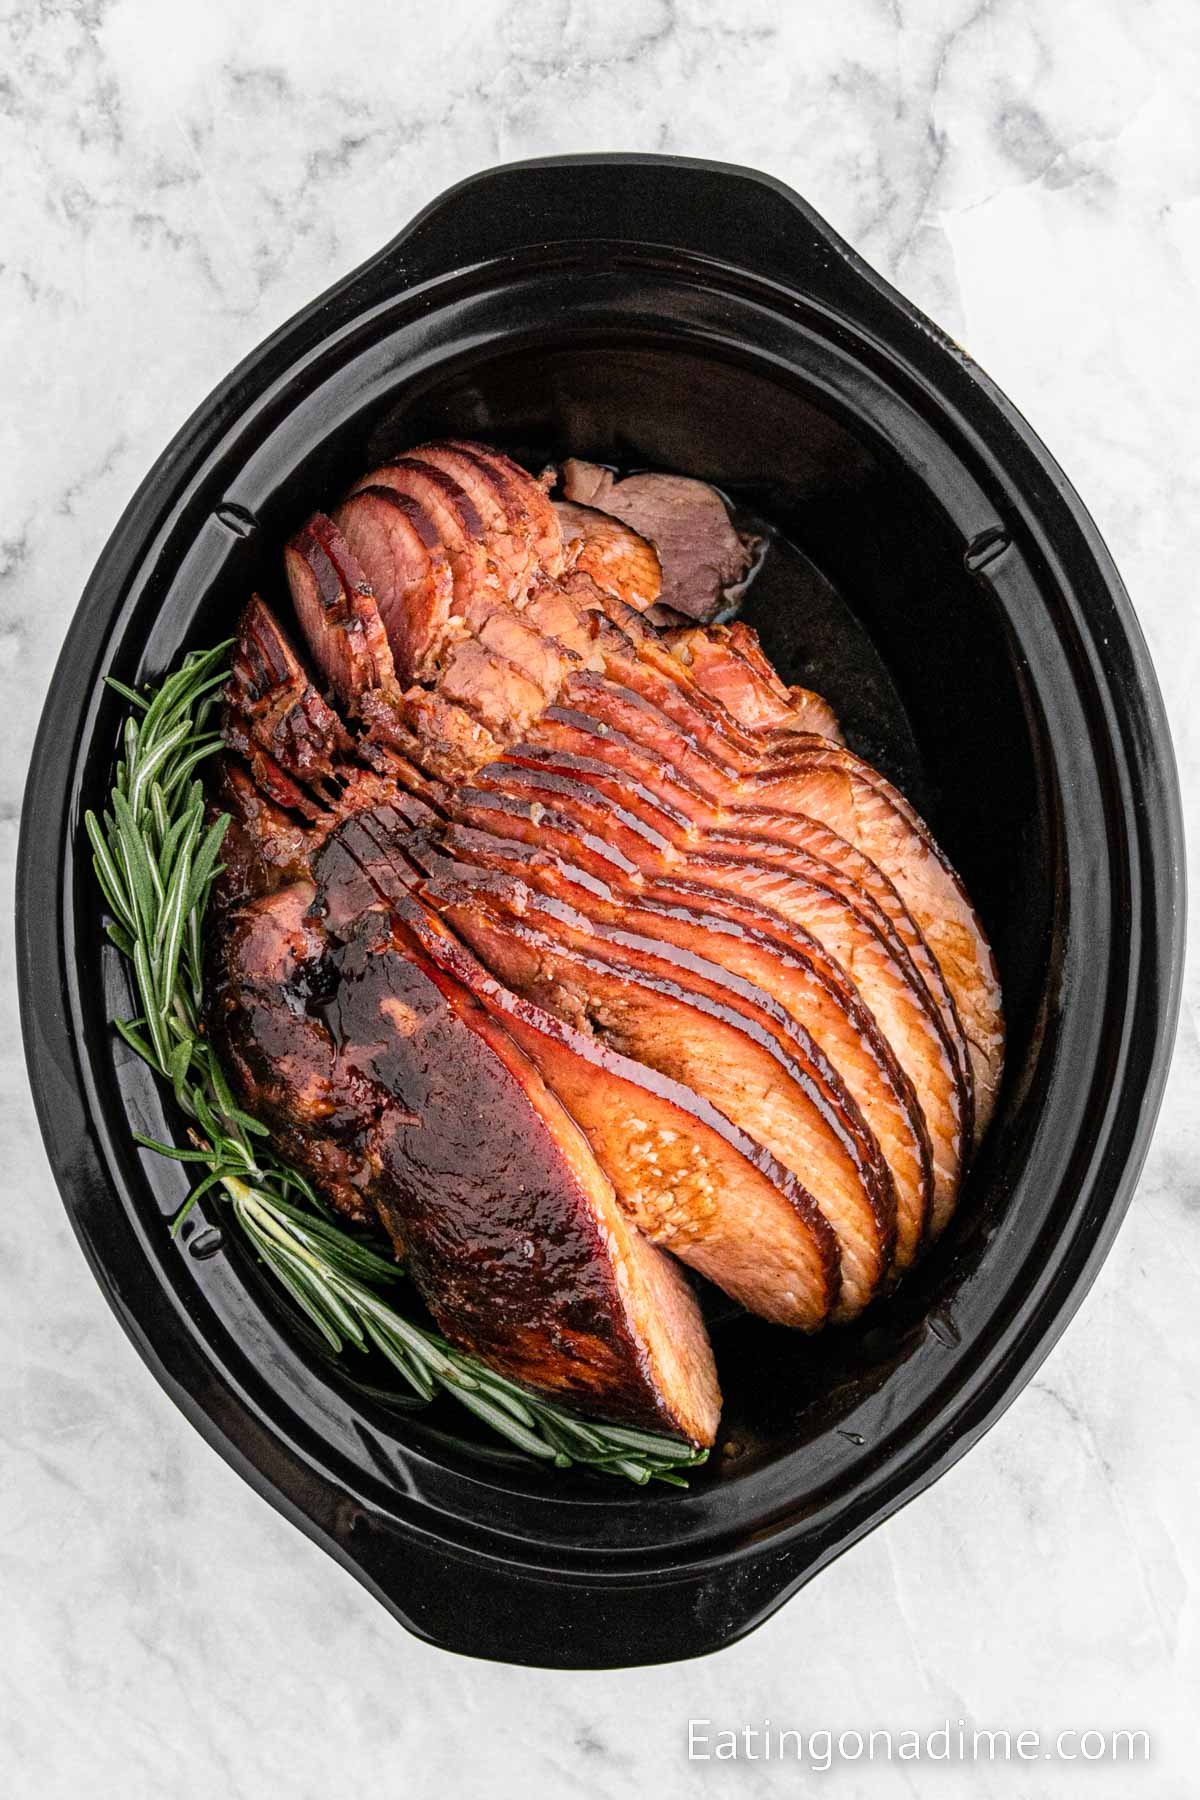 Cooked Spiral Ham in the crockpot with a rosemary sprig on the side